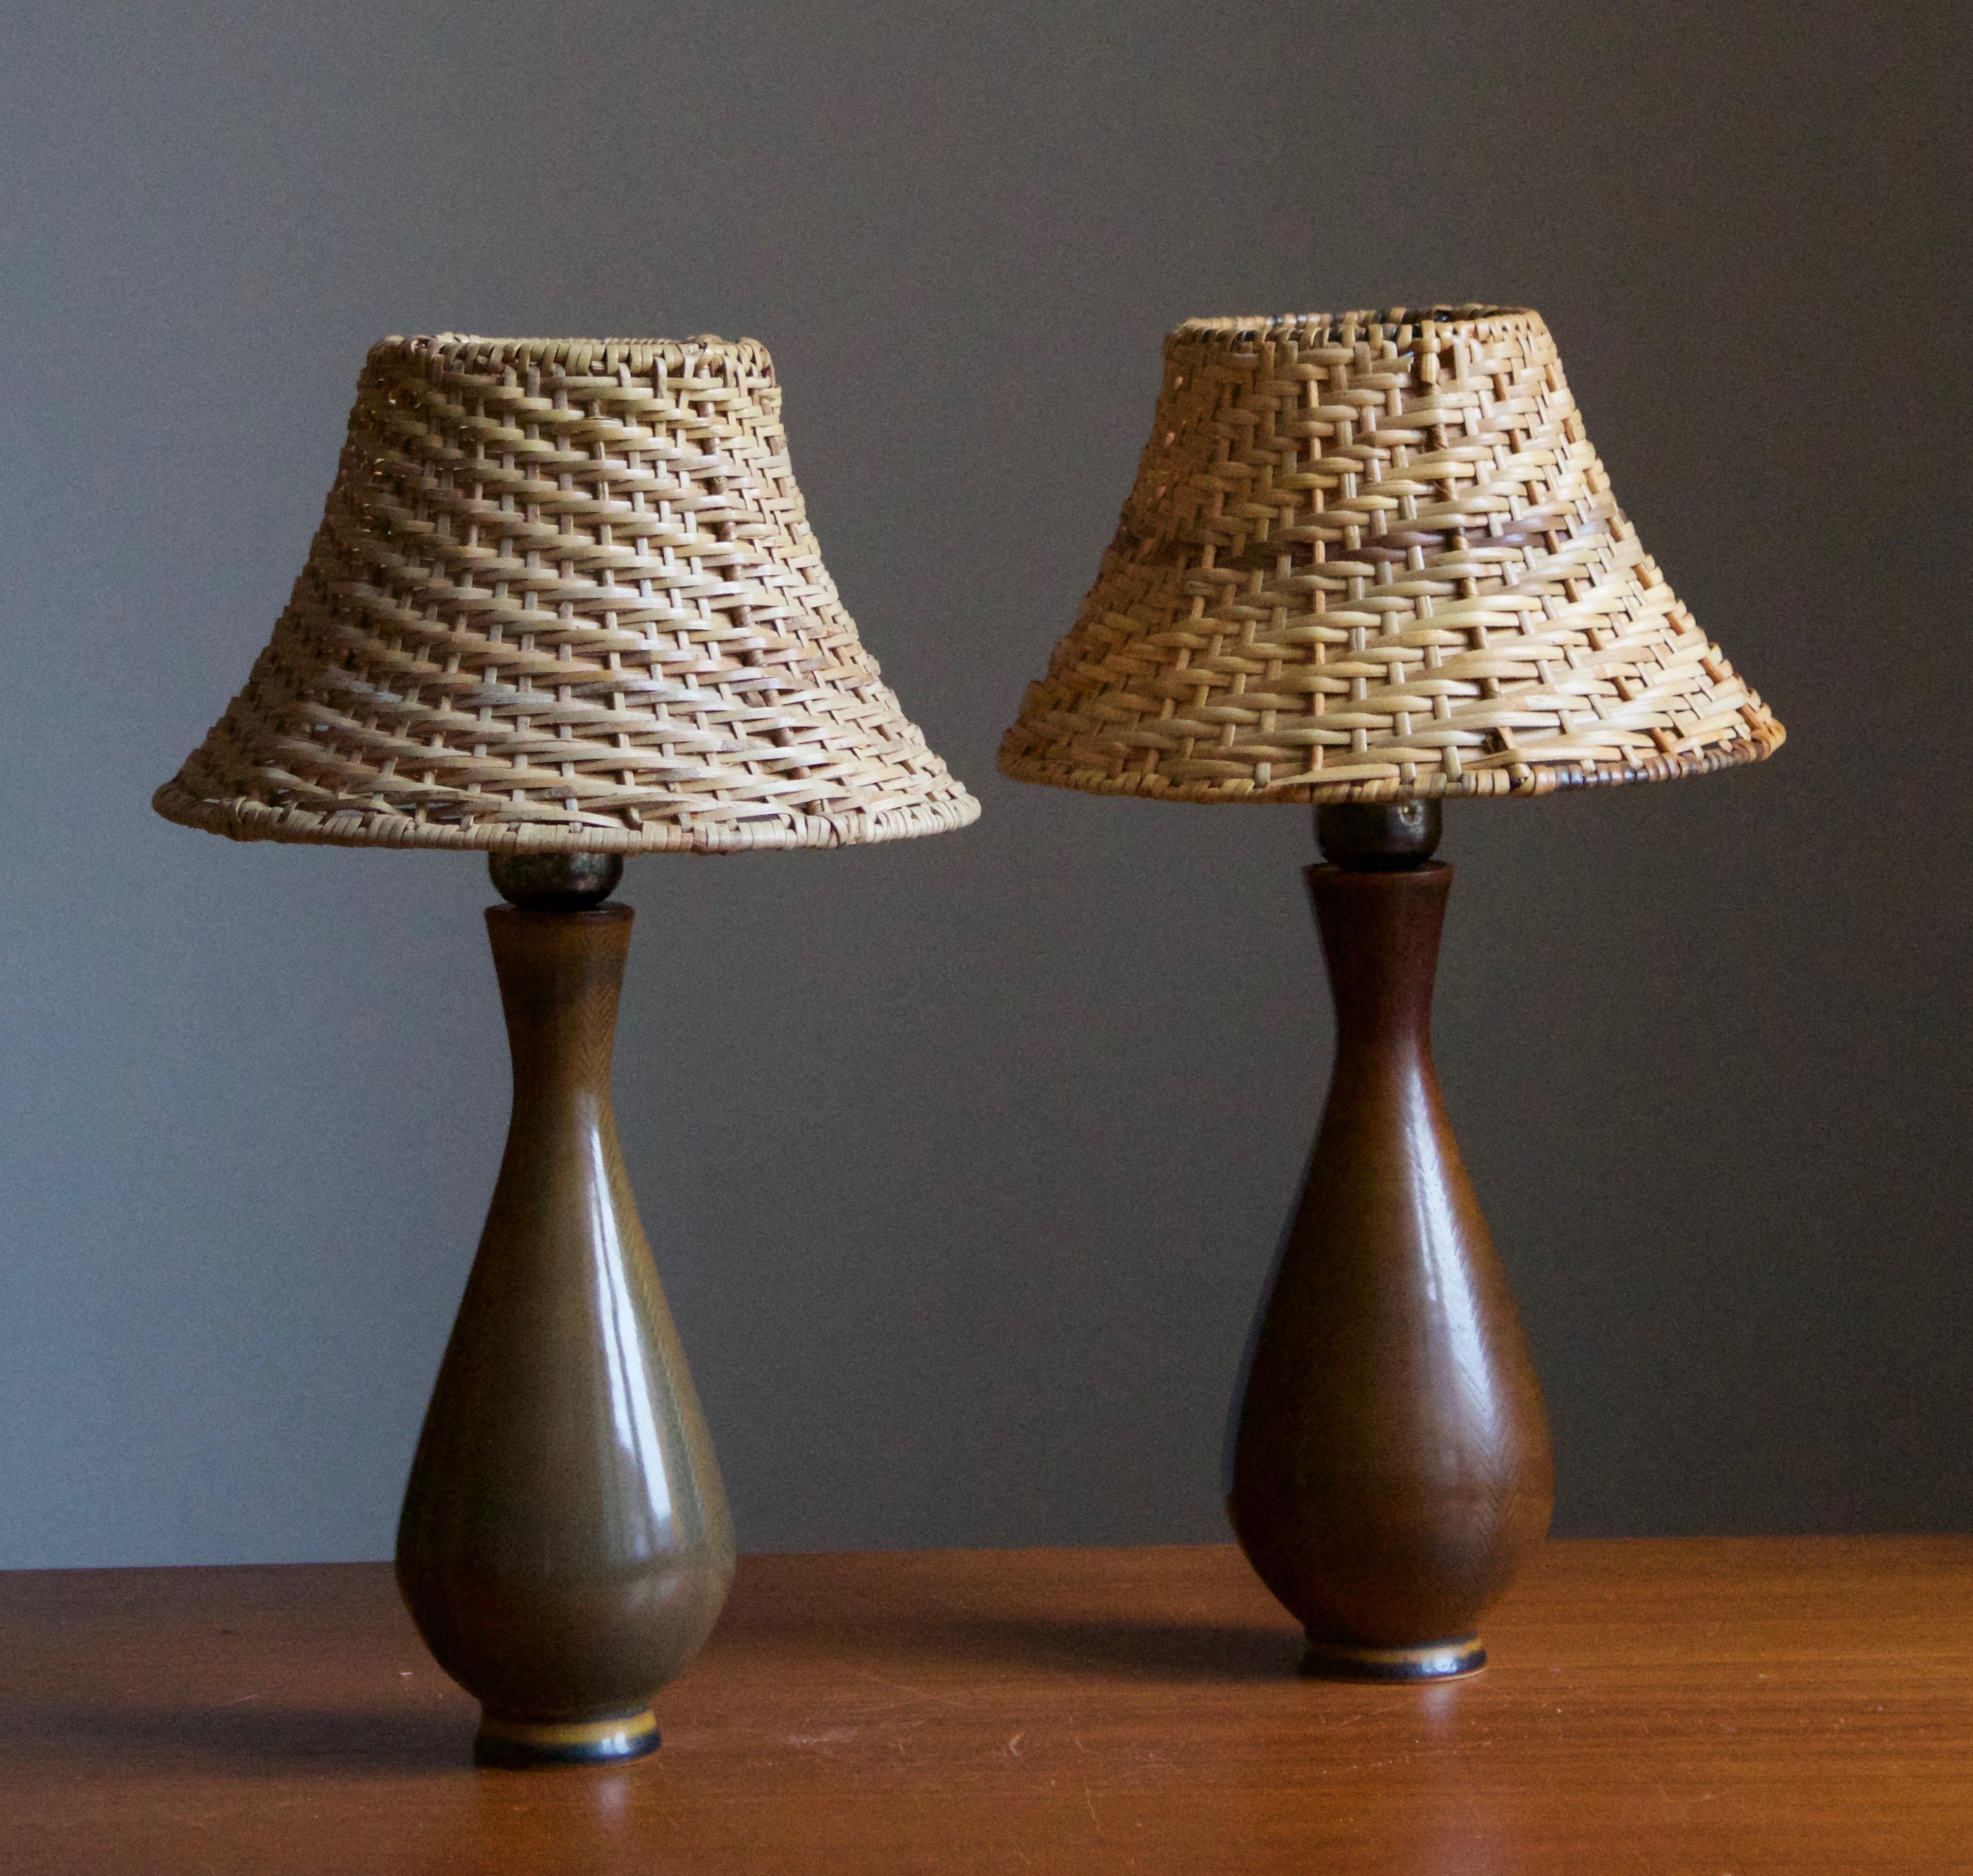 A pair of table lamps, produced by Andersson Johansson, Höganäs, Sweden, c. 1940s.

Features simple hand-painted decor.

Stated dimensions exclude lampshade. Height includes socket. Upon request illustrated model vintage rattan lampshades can be